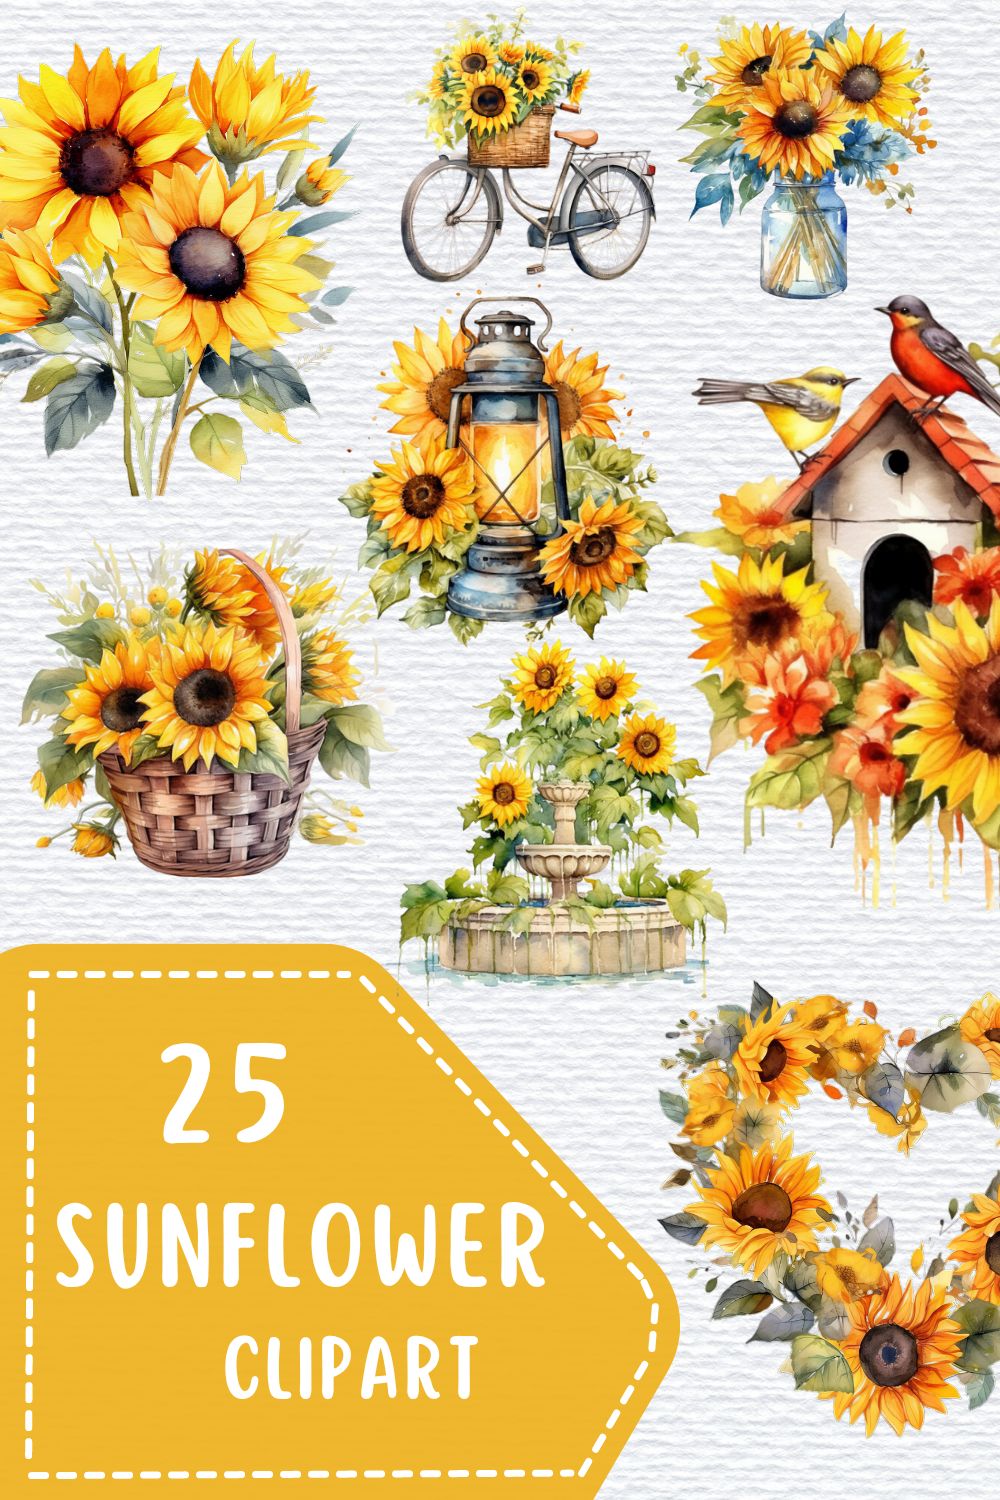 Watercolor Sunflowers PNG, Clipart, Transparent, Summer clipart, wedding clipart, Nursery Art, Hand drawn illustrations, watercolor clipart pinterest preview image.